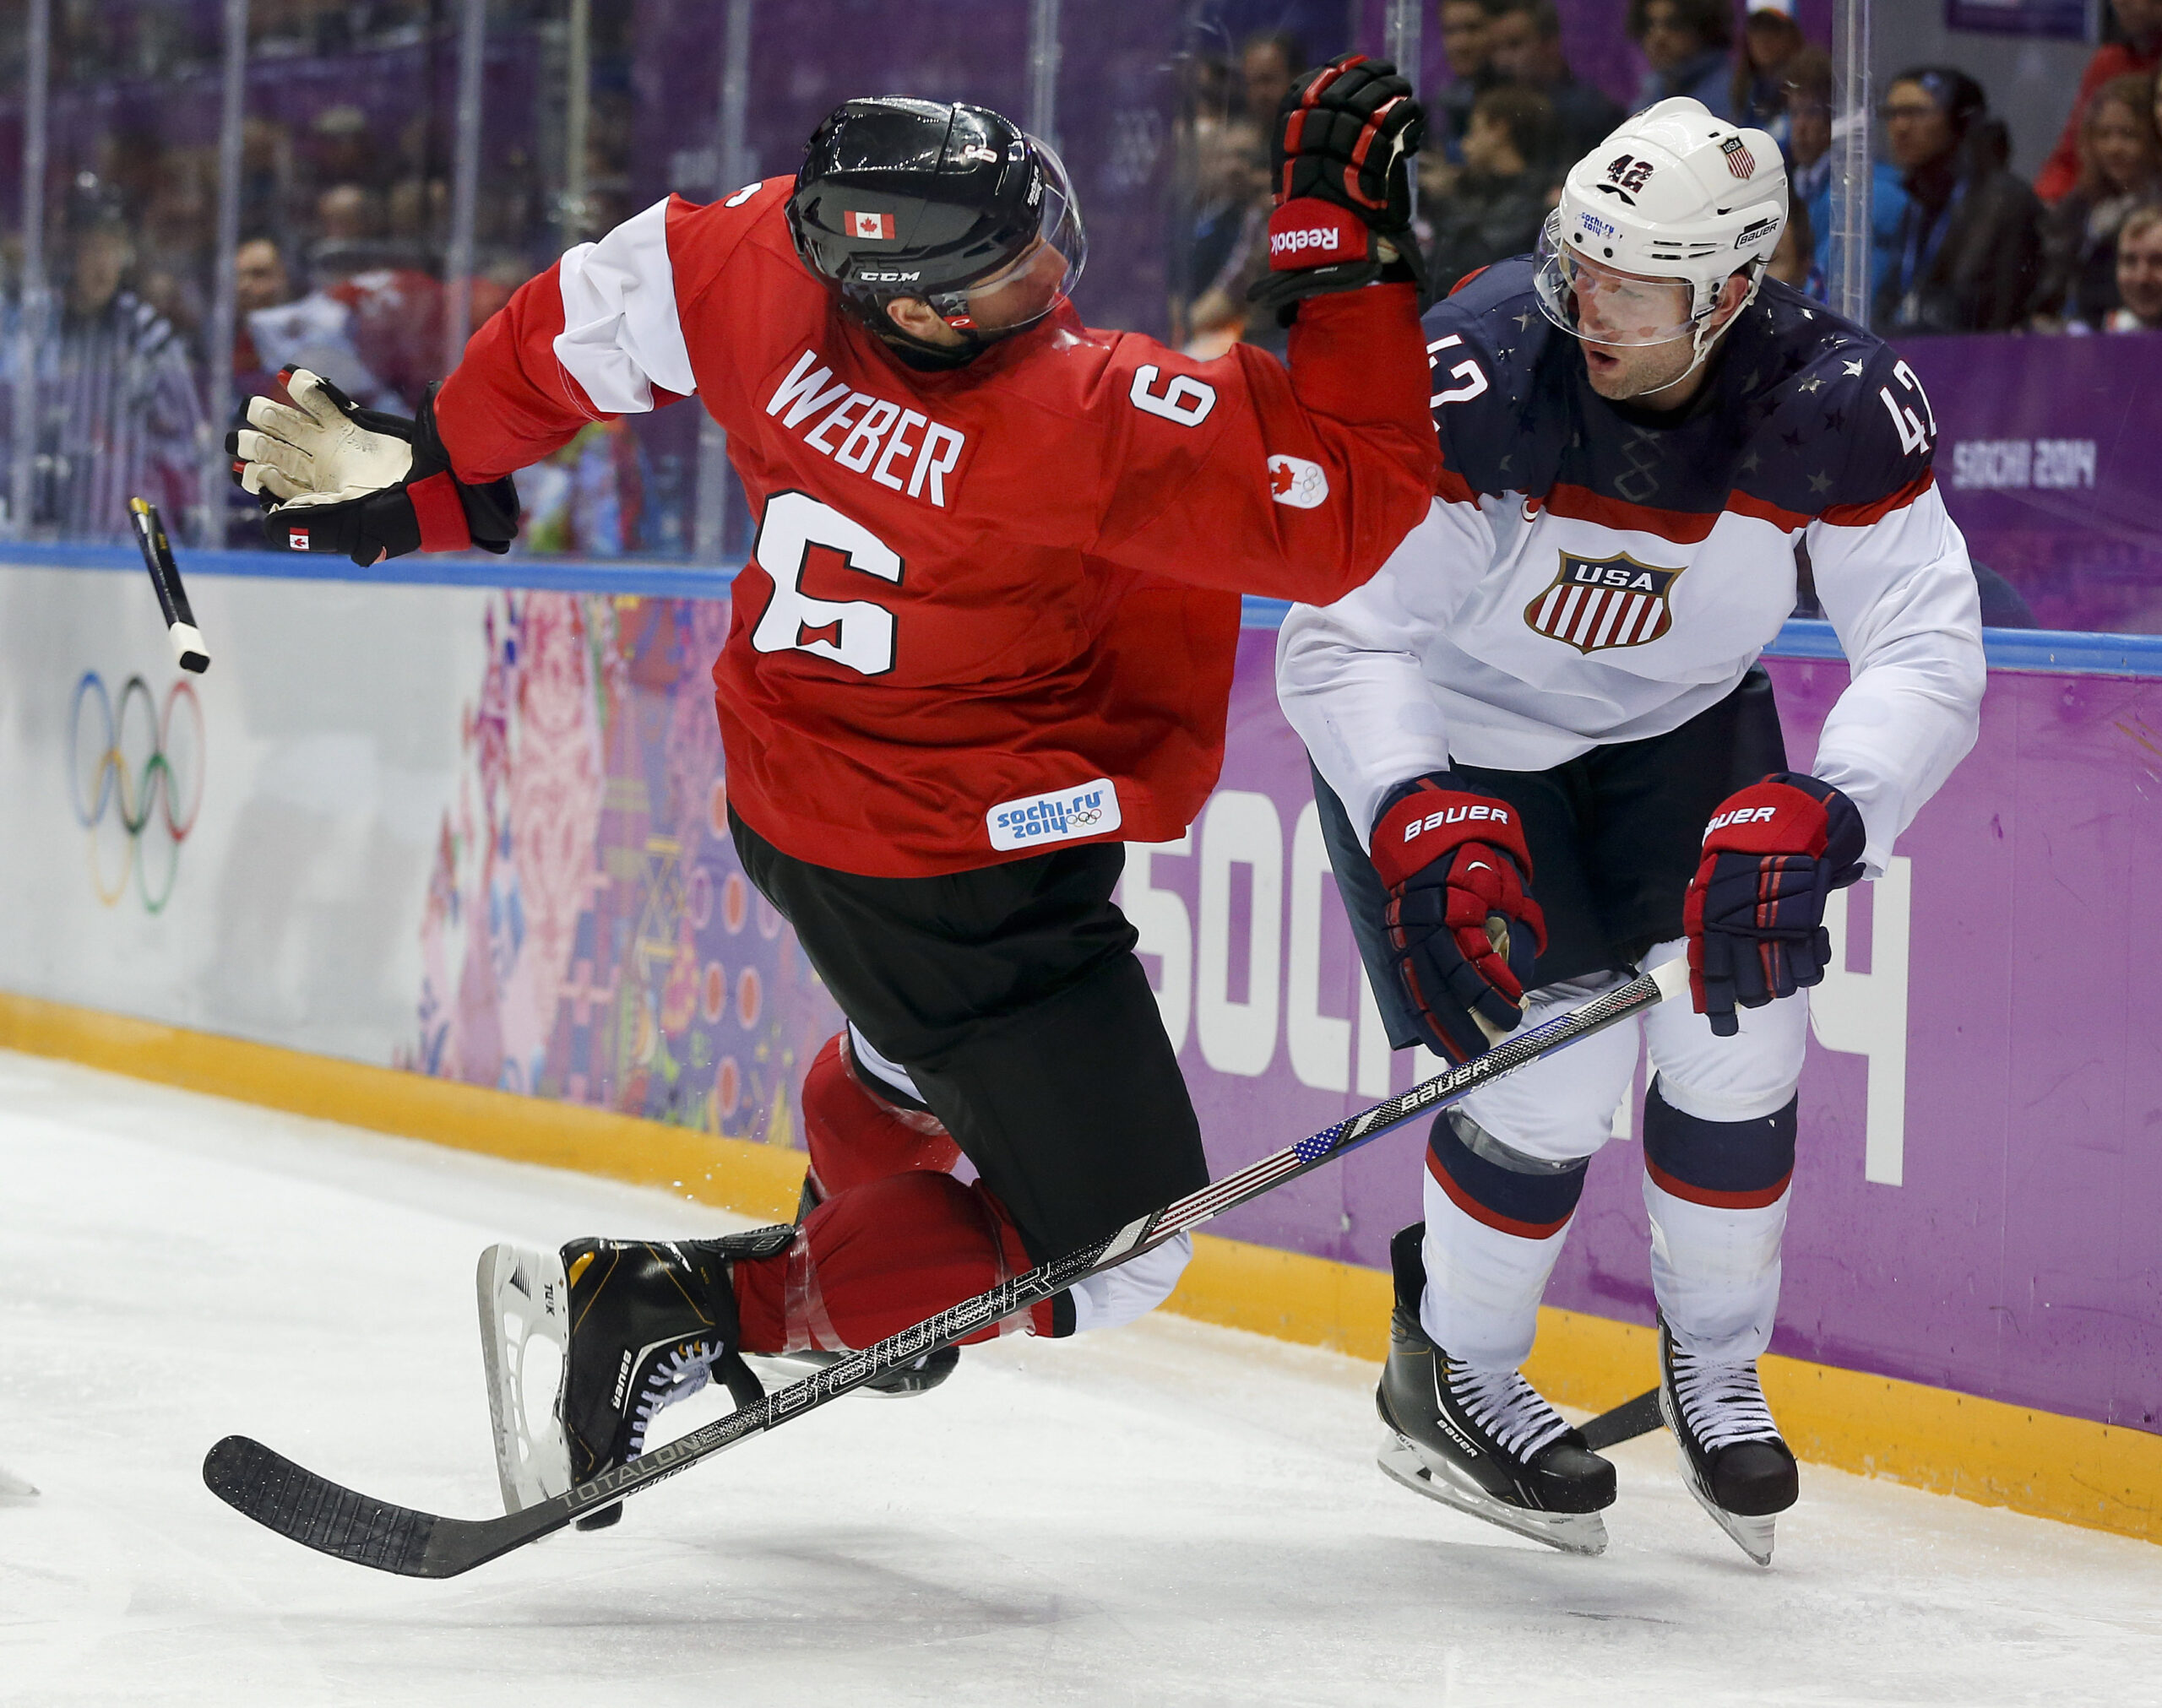 FILE -Canada defenseman Shea Weber, left, trips over USA forward David Backes during the third period of a men's semifinal ice hockey game at the 2014 Winter Olympics, Friday, Feb. 21, 2014, in Sochi, Russia. NHL players will not take part in the upcoming Winter Olympics in Beijing after all. A person with direct knowledge of the decision tells The Associated Press the league is going to withdraw from the Olympics after the regular-season schedule was disrupted by coronavirus outbreaks, Tuesday, Dec. 21, 2021.(AP Photo/Julio Cortez, File)